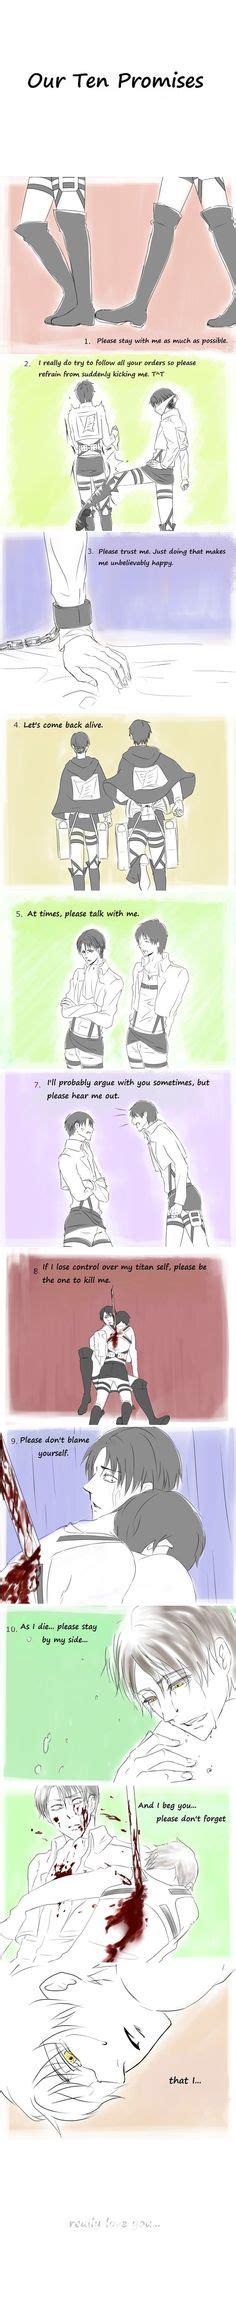 Our 10 Promises Attack On Titan Comic Original By 驟雨 Translated By